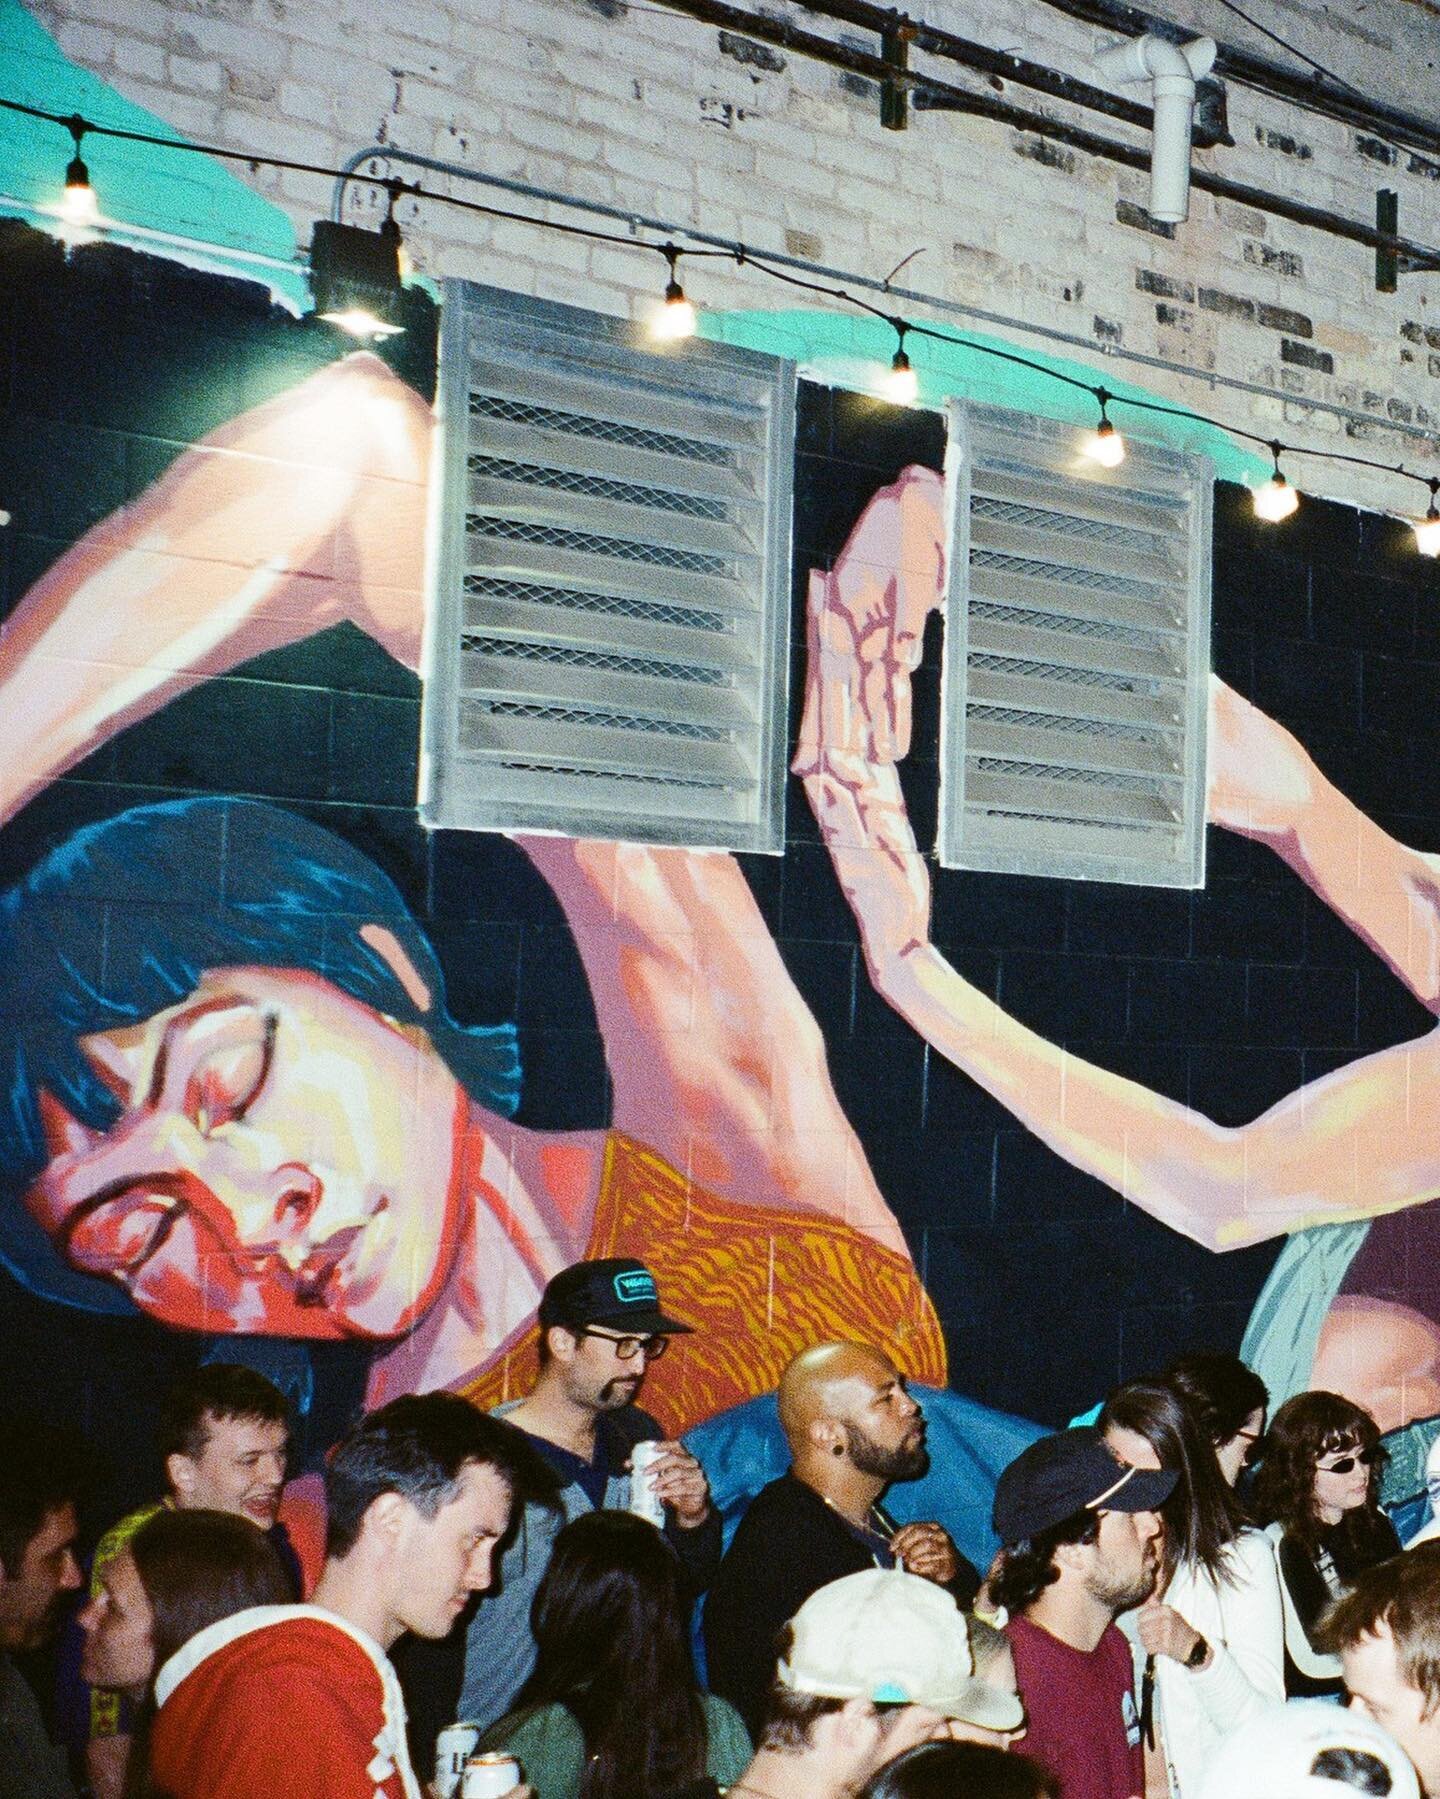 earlier this summer I stumbled upon a dance party in front of my @blackcatmke wall. Biiiiig s/o to @tommymoorestudio for capturing it on film!! 🖤

While designing this piece I was 1000% hoping it might inspire some movement so this was truly so cool